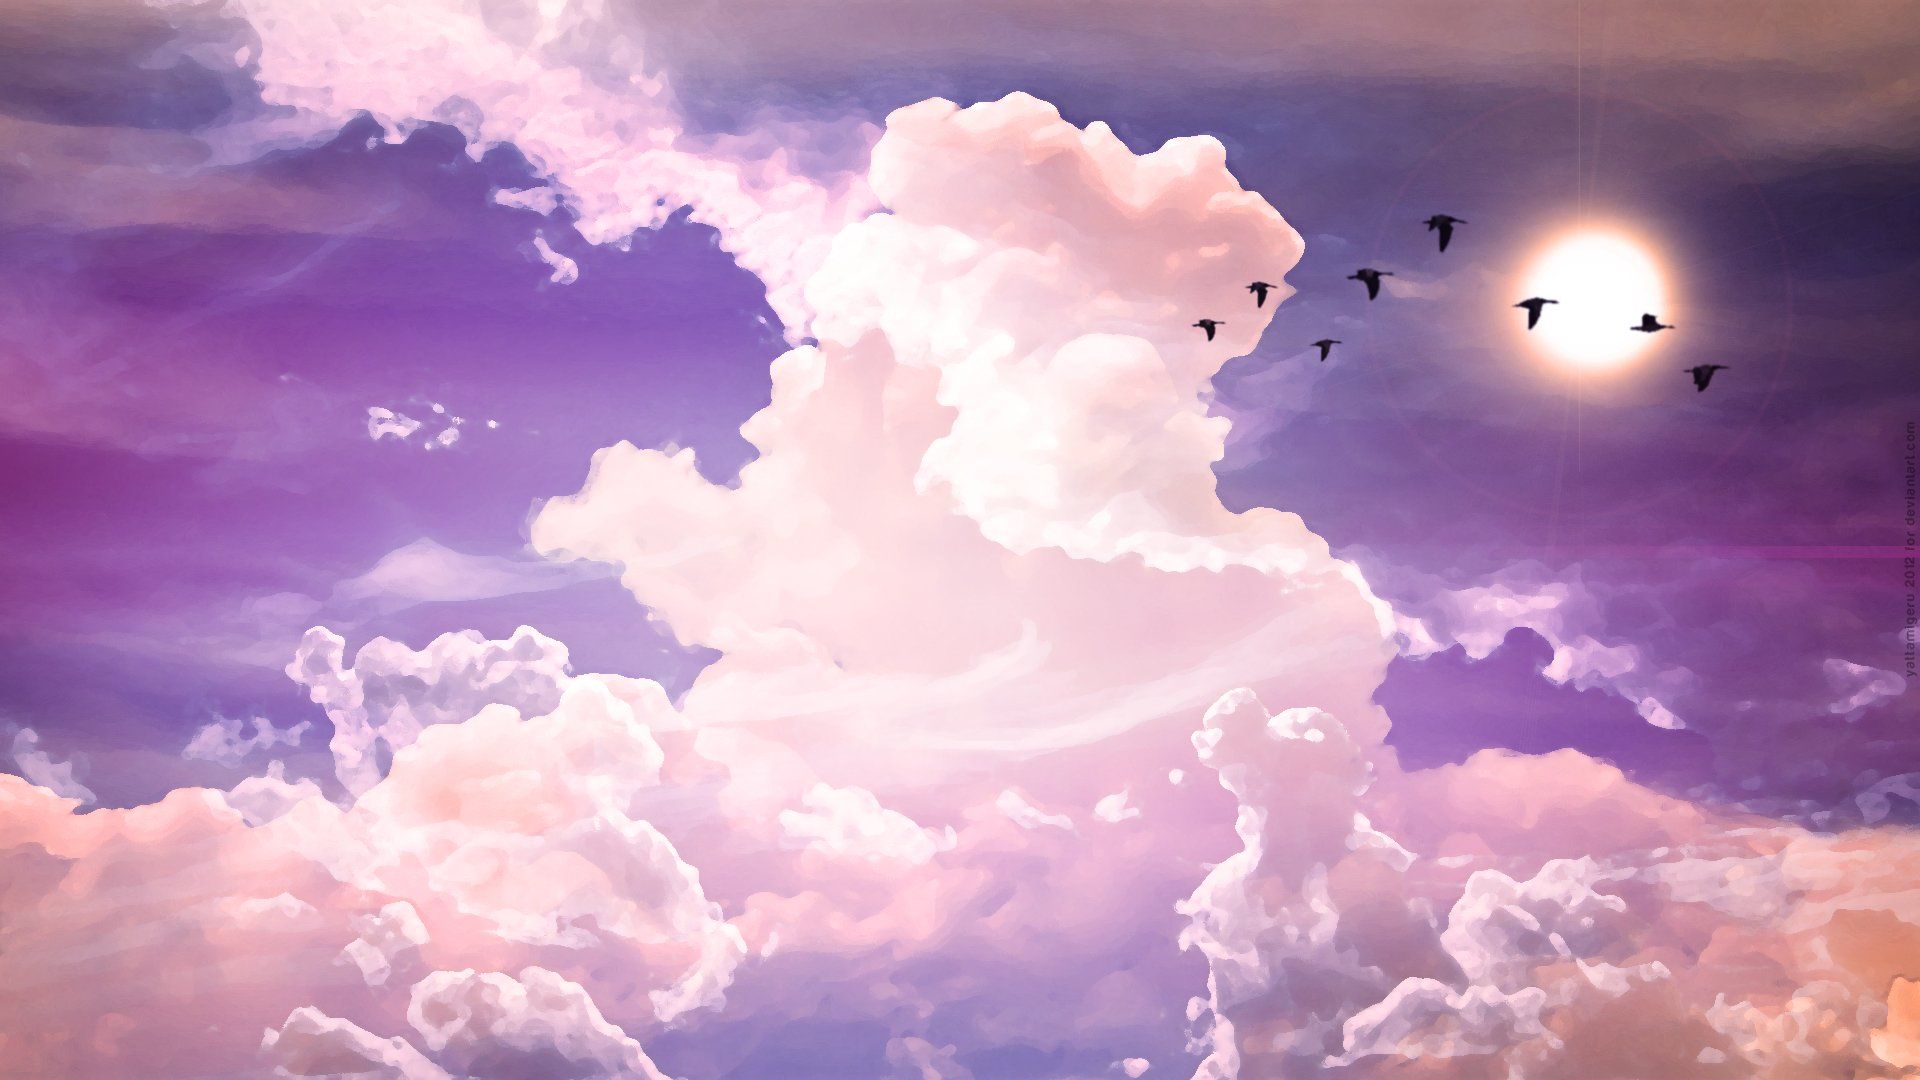 Birds Flying by White Puffy Clouds HD Wallpaper. Background Image